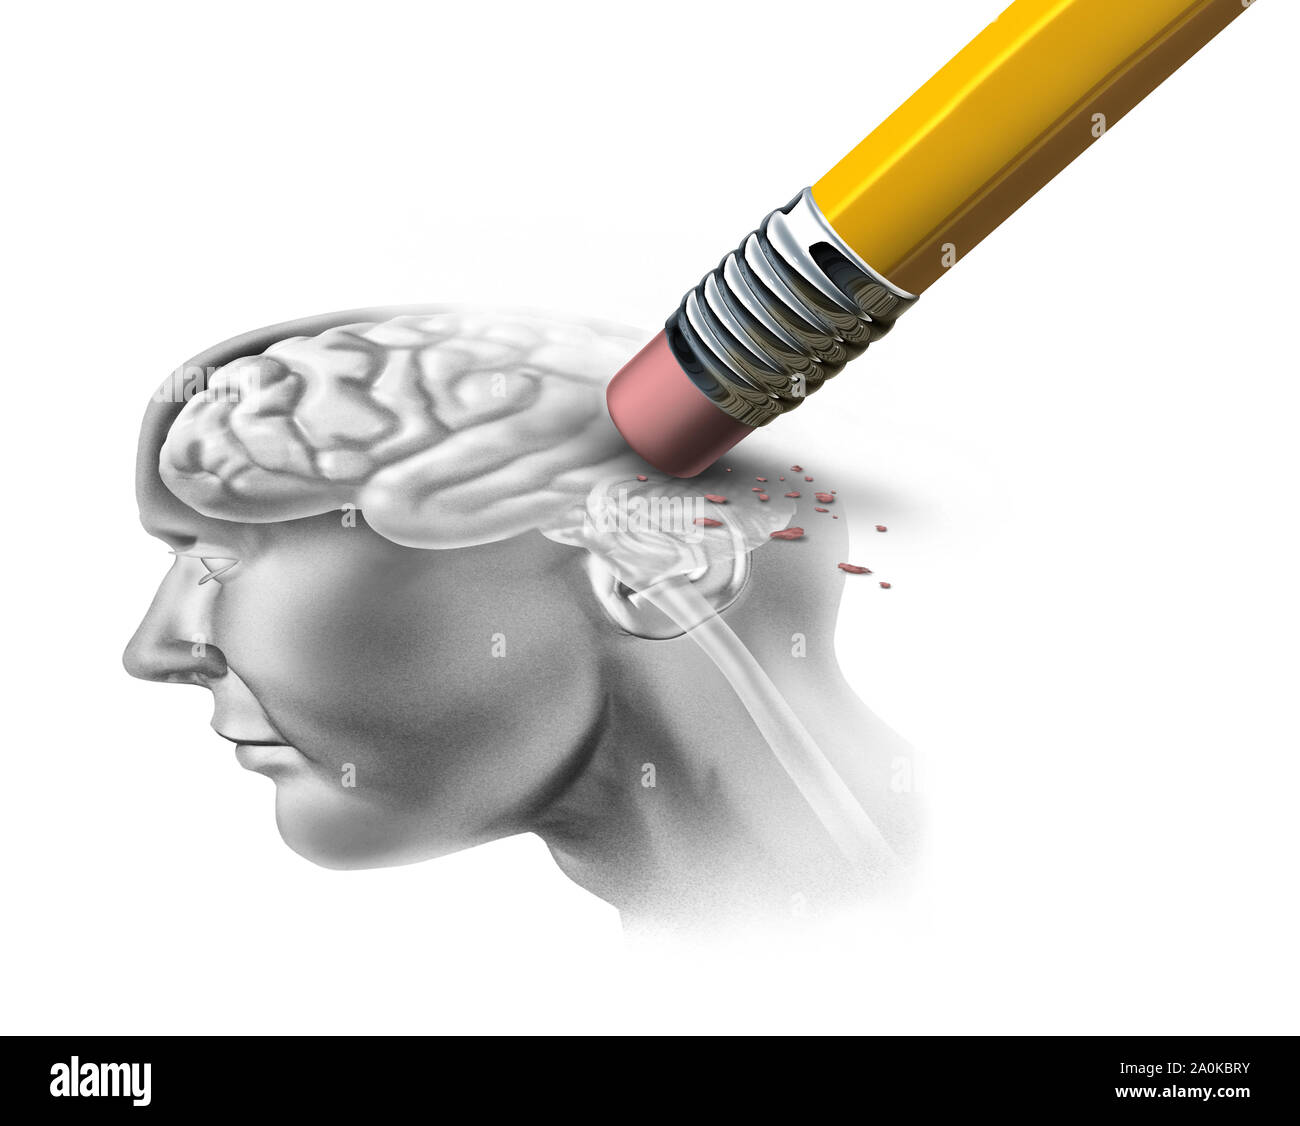 Concept of memory loss and dementia disease and losing brain function memories as an alzheimers health symbol of neurology and mental problems. Stock Photo